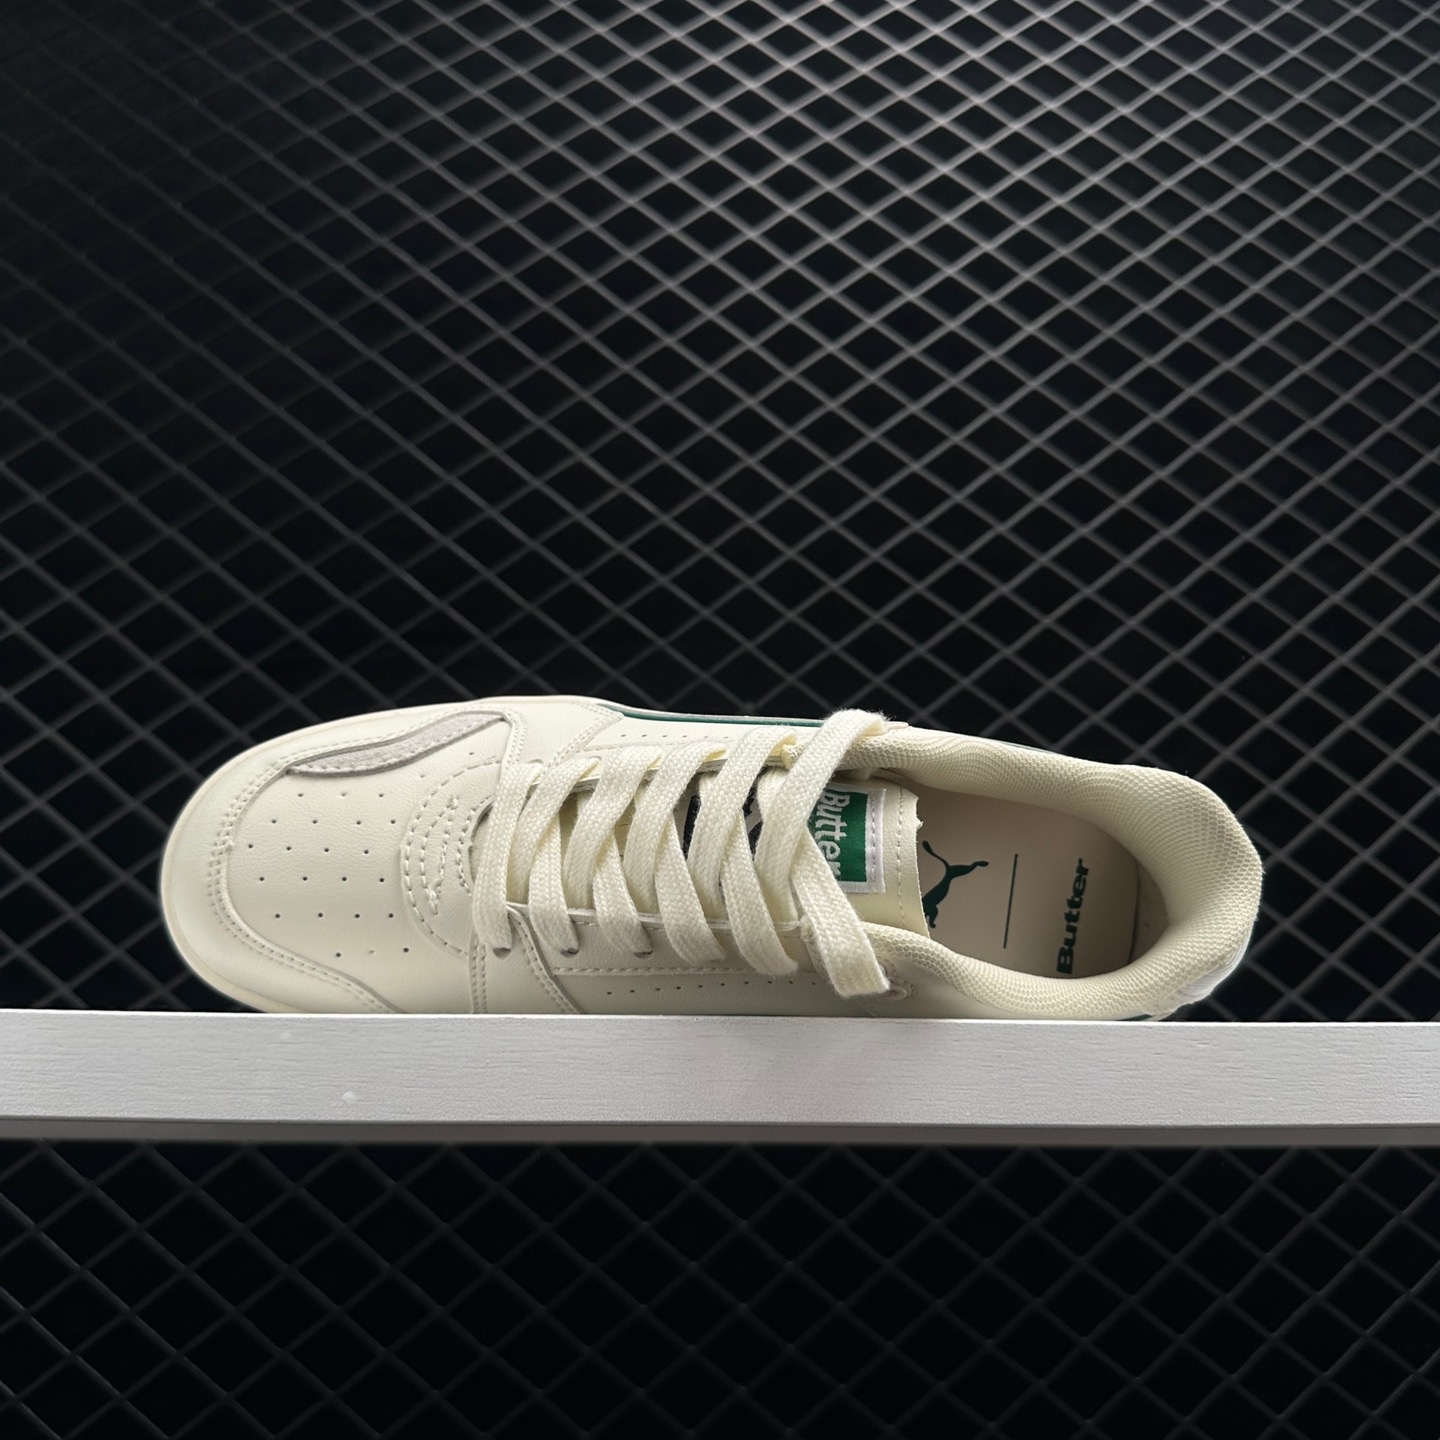 PUMA Butter Goods x Slipstream Low 'Whisper White' Sneakers – Exclusive Collaboration with 381787-01